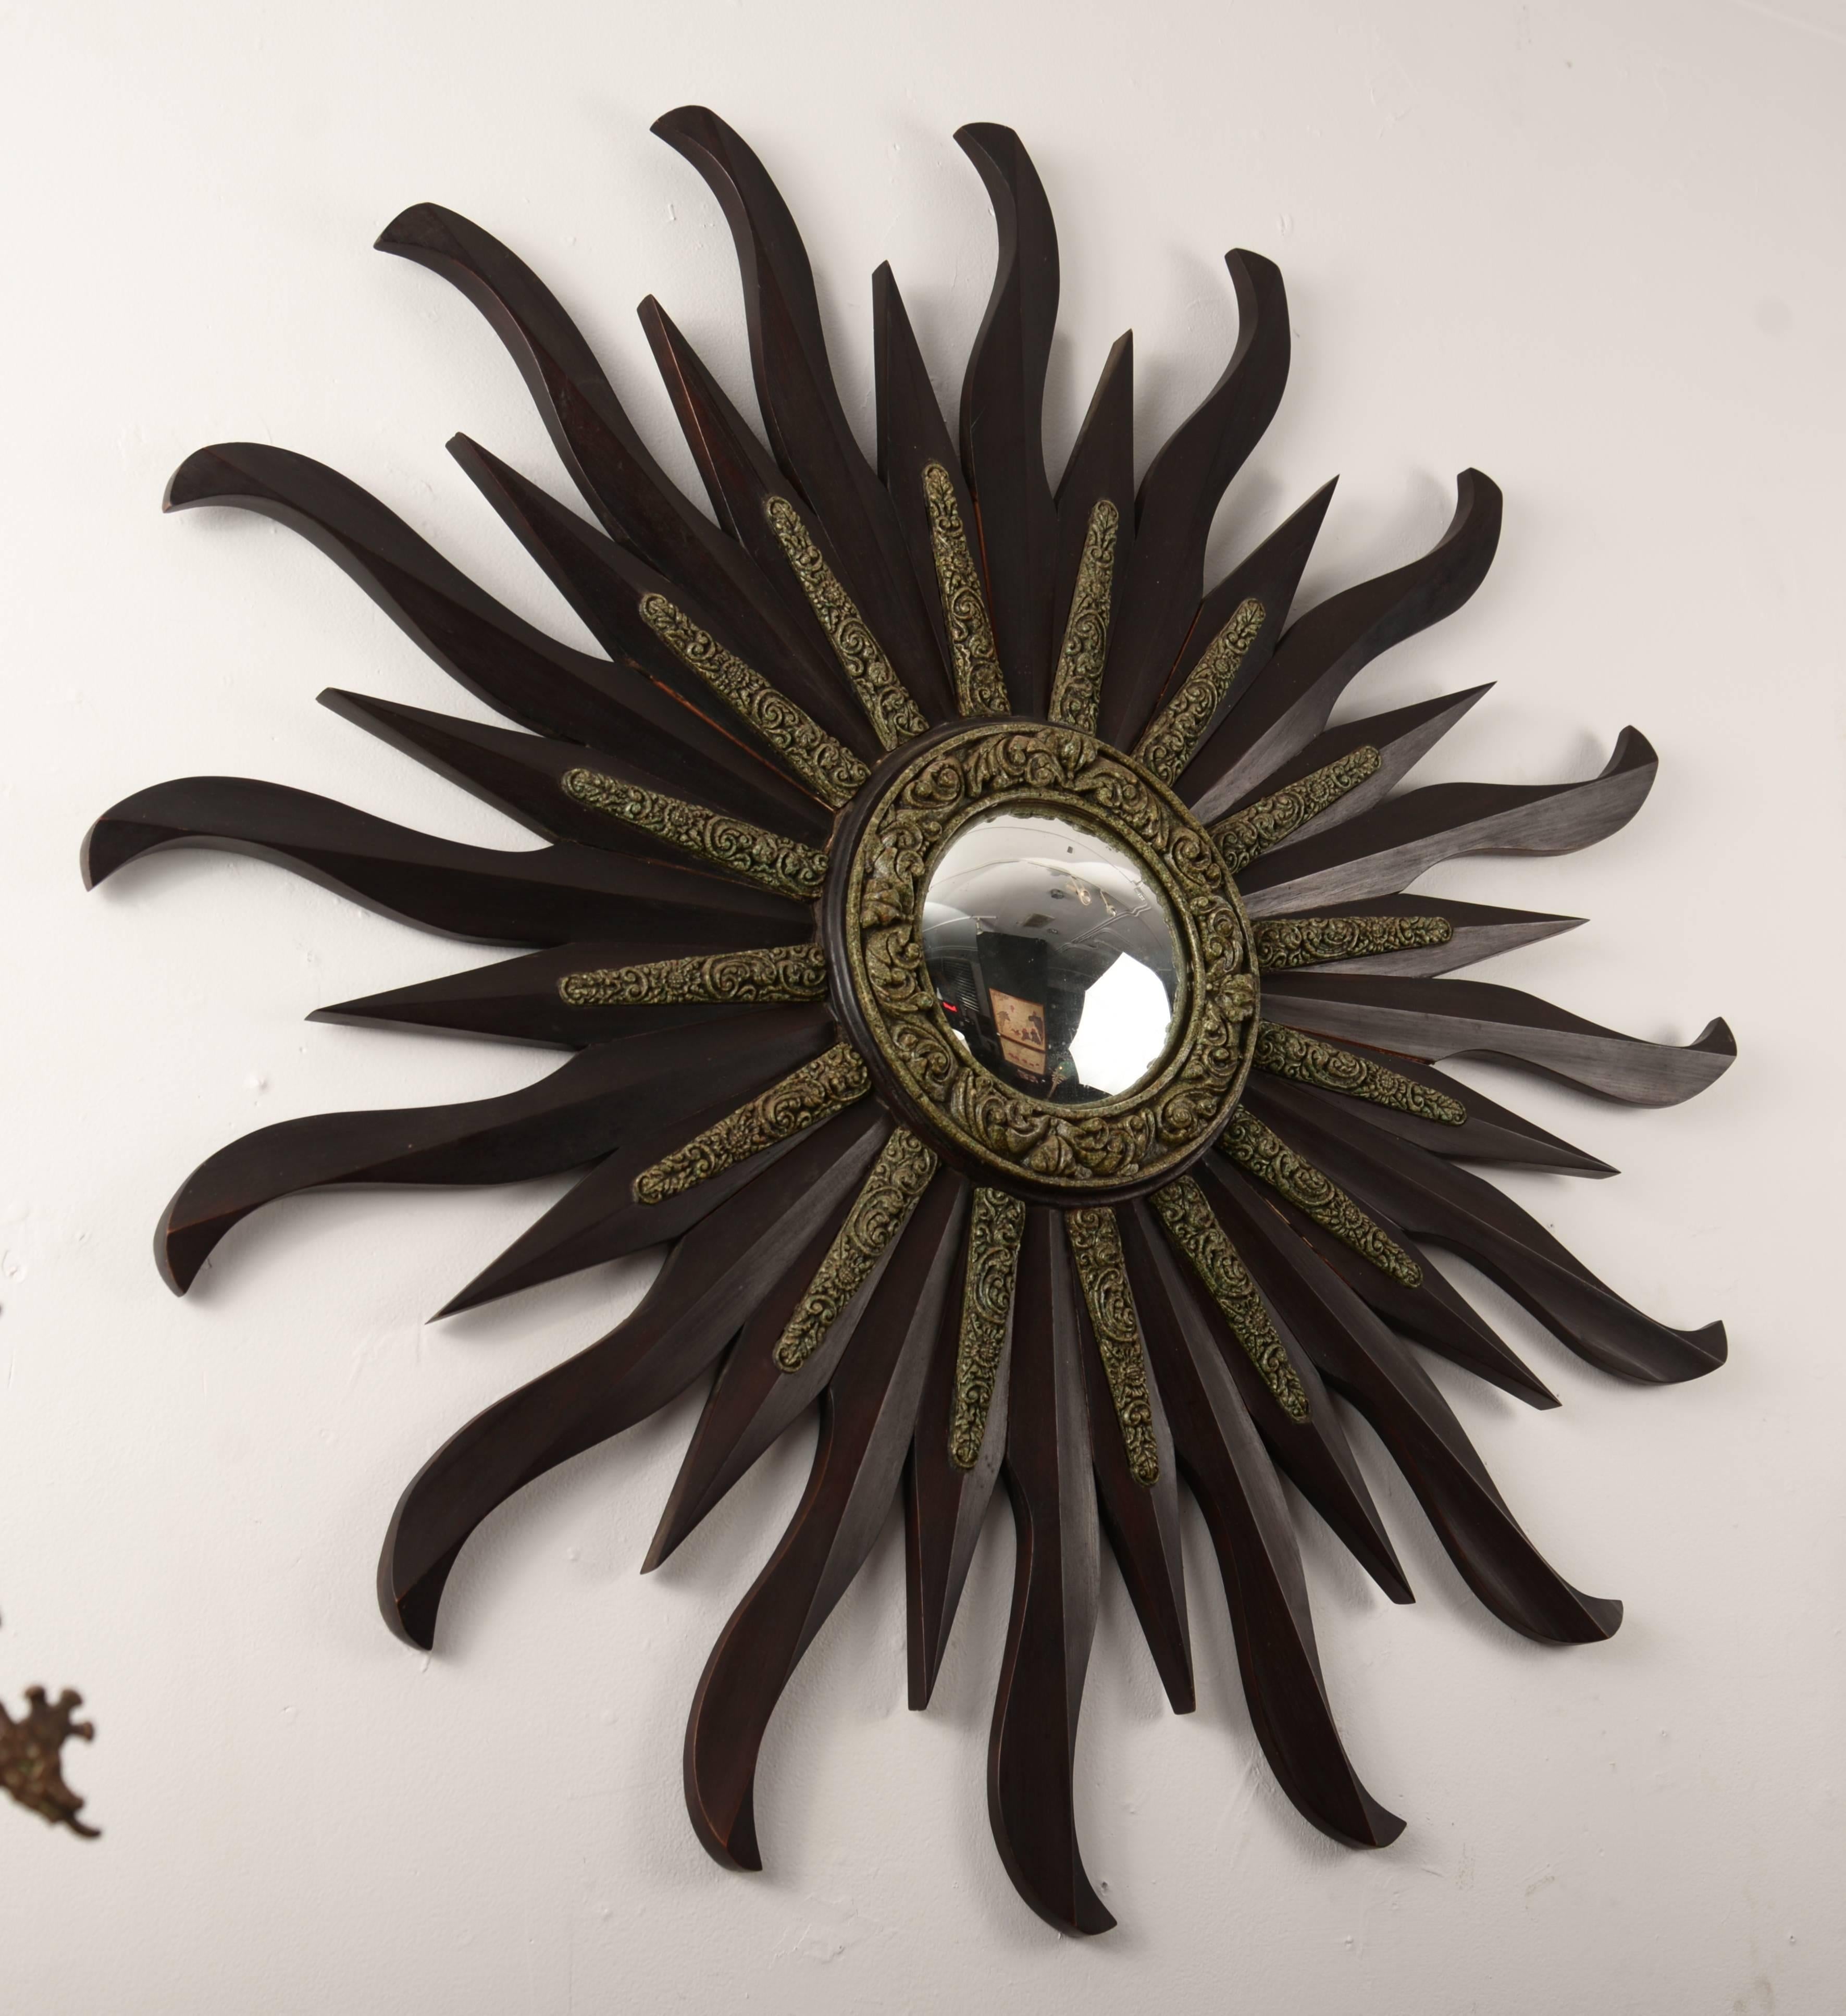 Wooden starburst mirror with a round inset convex mirror and decorative cast tribal ornamentation.